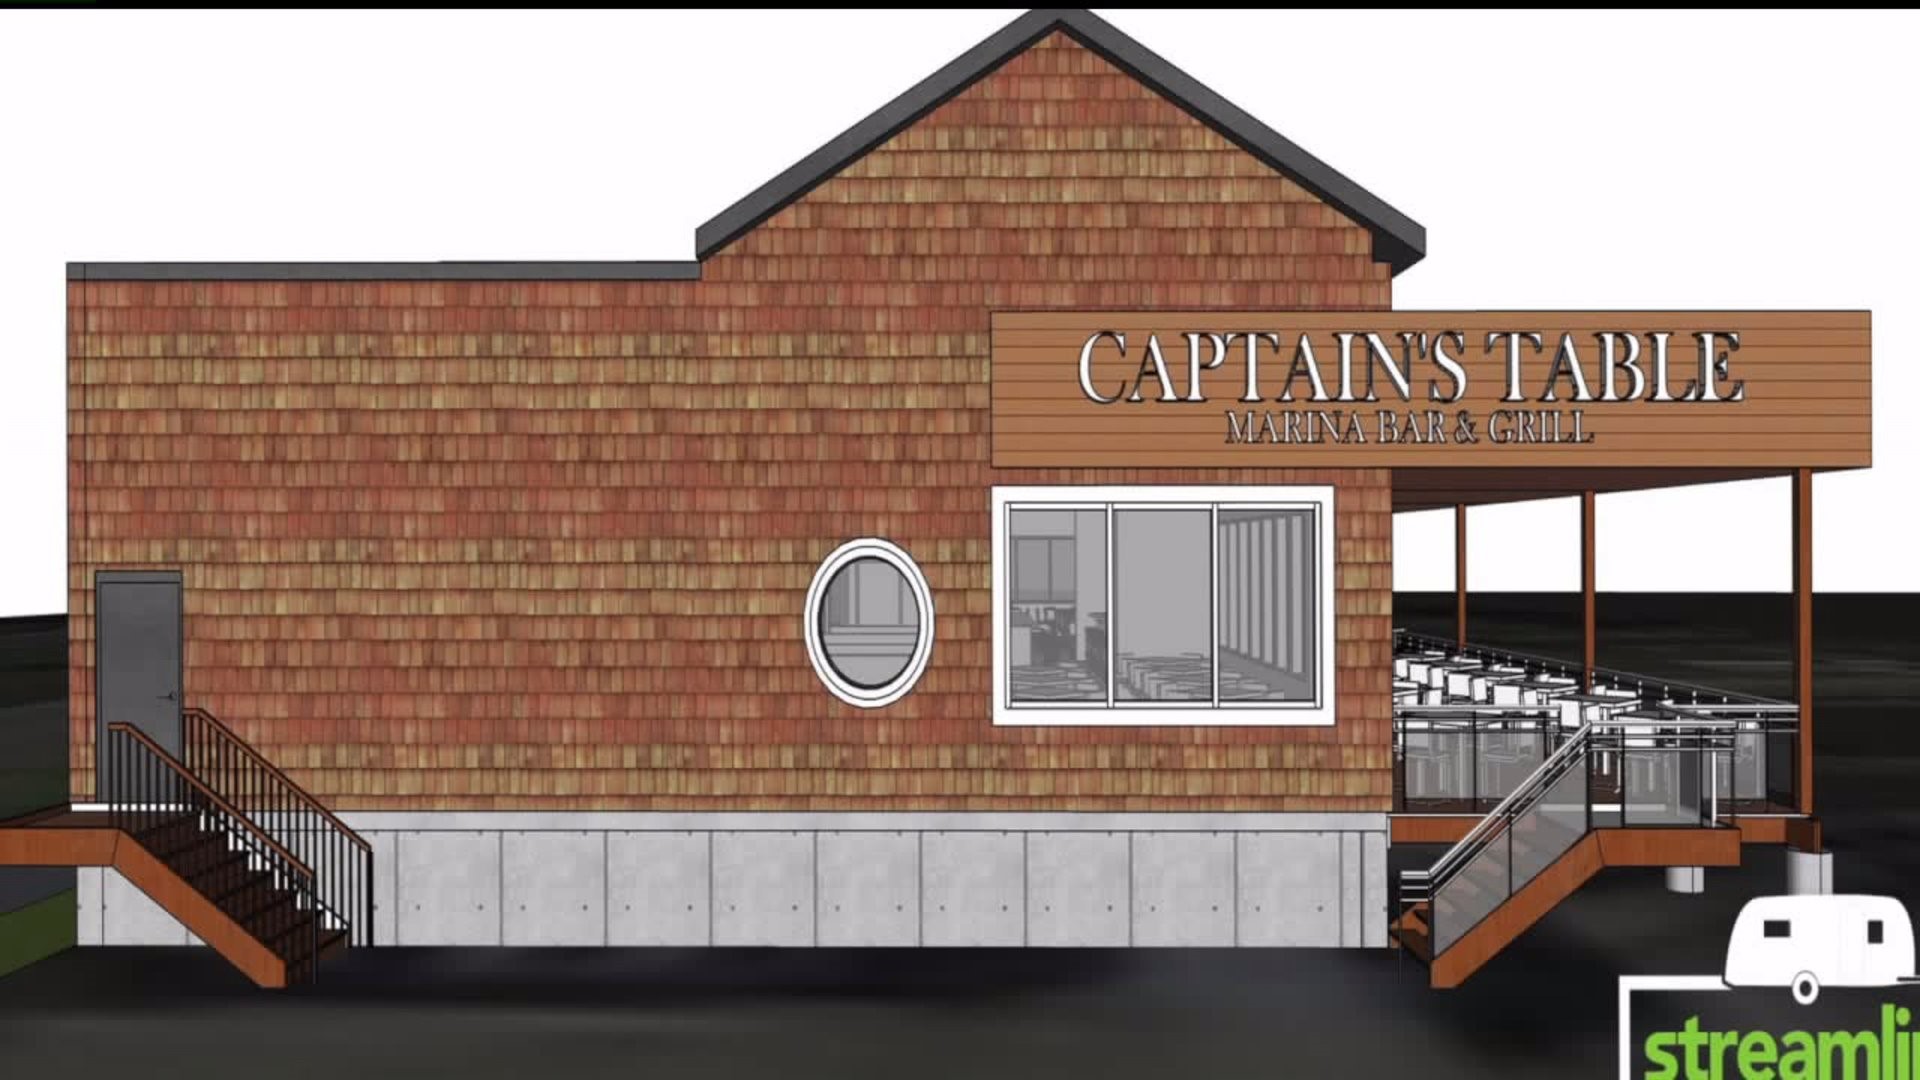 Captain`s Table renderings downgraded to jive with location